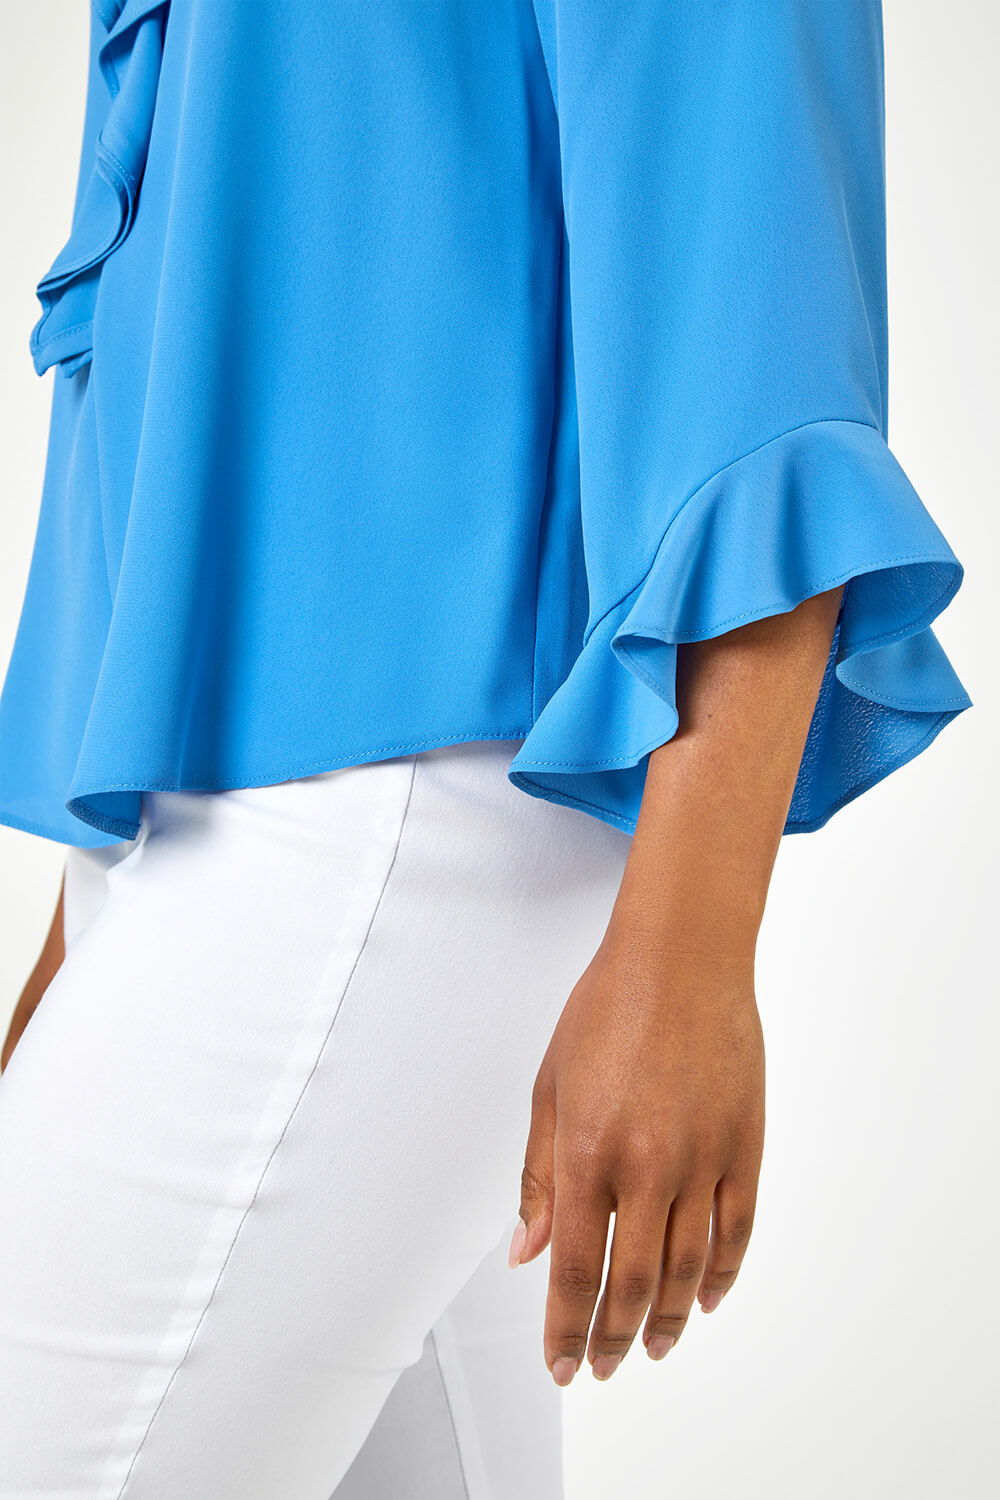 Blue Petite Flared Sleeve Frill Detail Blouse, Image 5 of 5